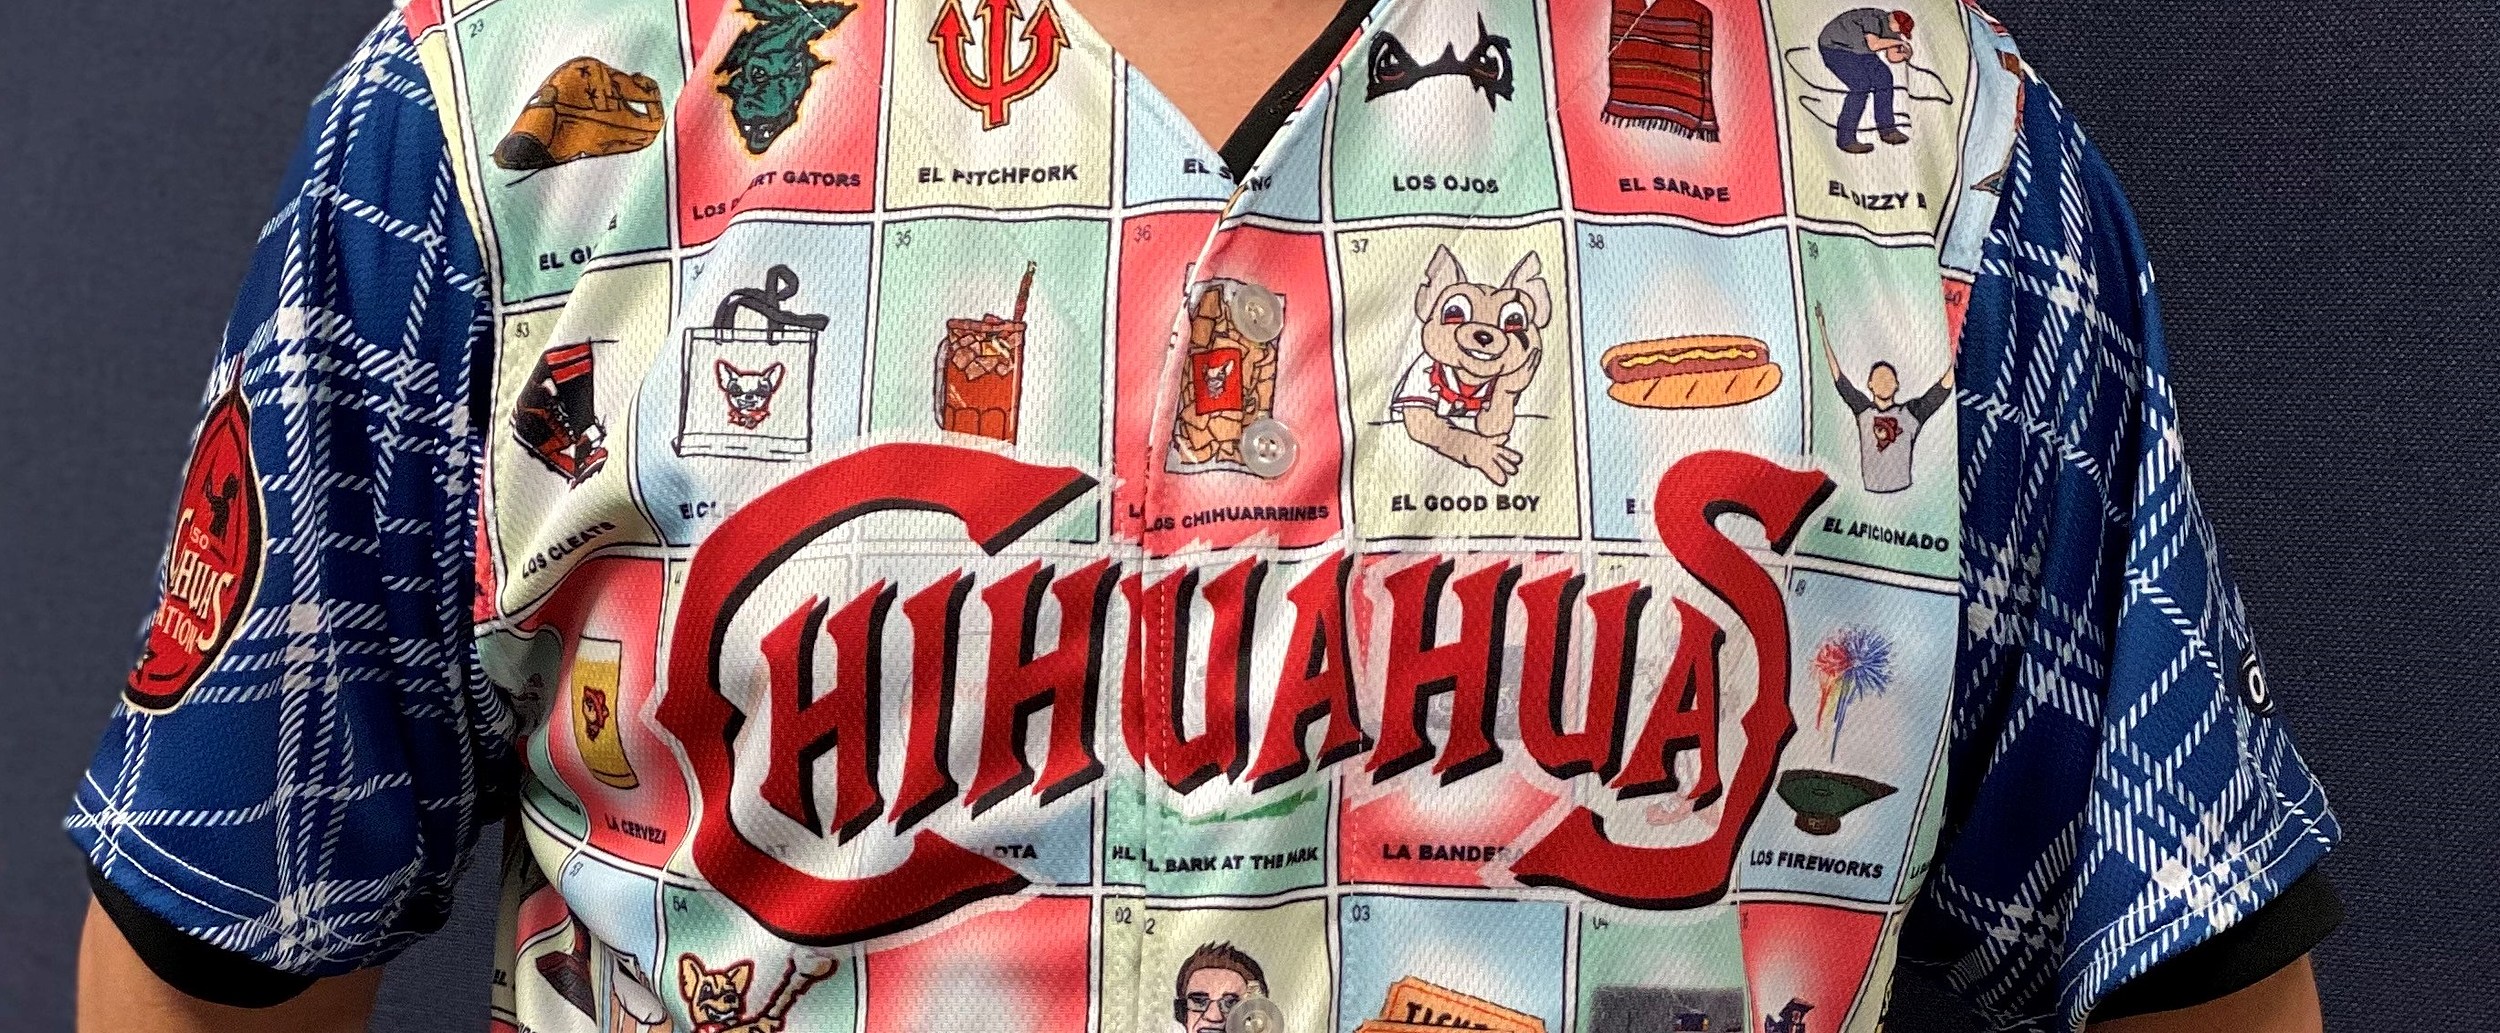 El Paso Chihuahuas Pay Tribute to Mexico With Lotería Jerseys